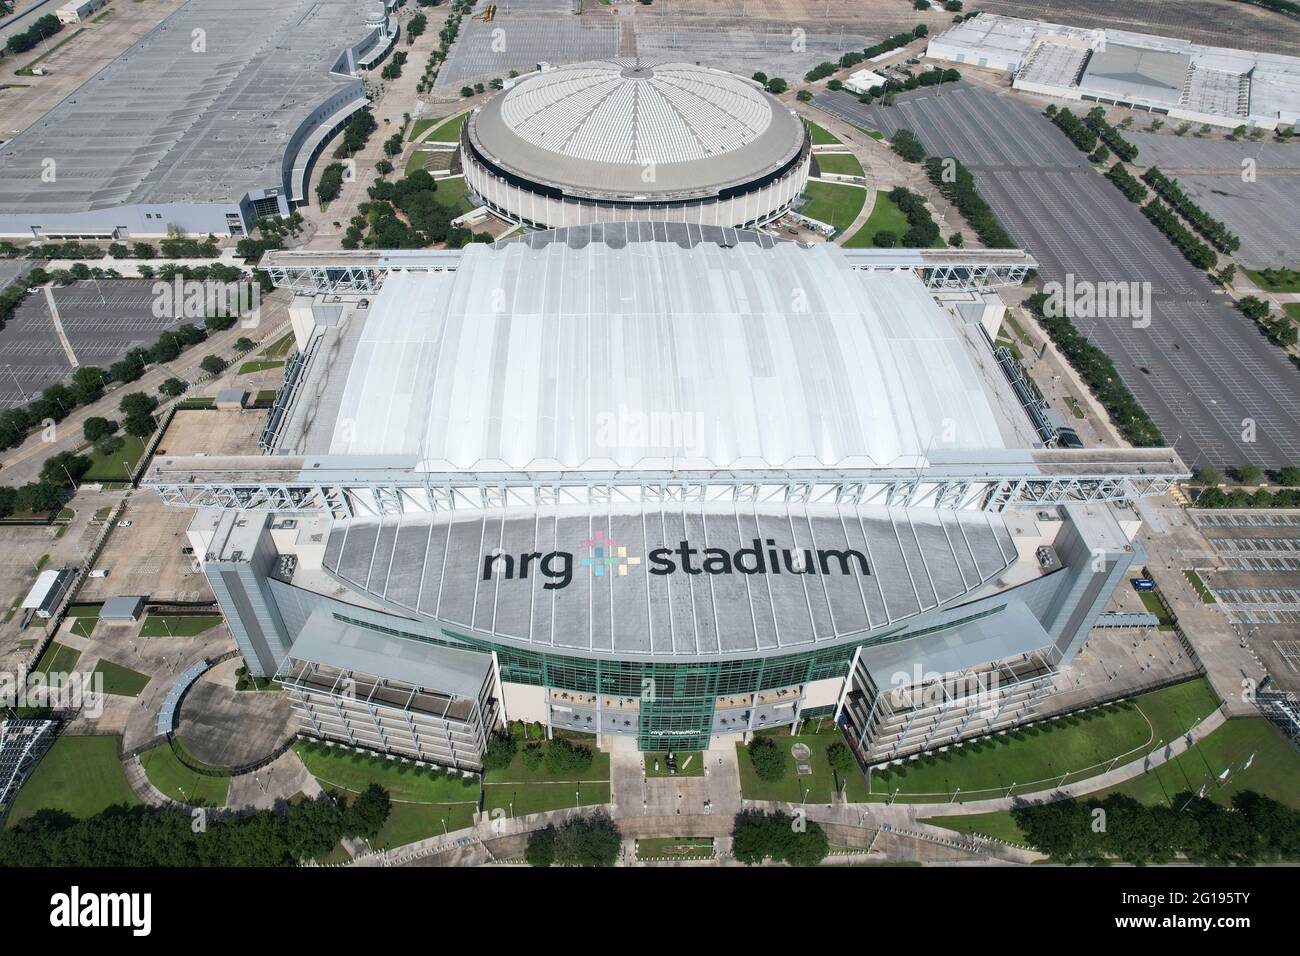 An aerial view of NRG Stadium and Astrodome, Sunday, May 30, 2021, in  Houston. NRG Stadium is the home of the Houston Texans. The Astrodome  served as the home of the Houston